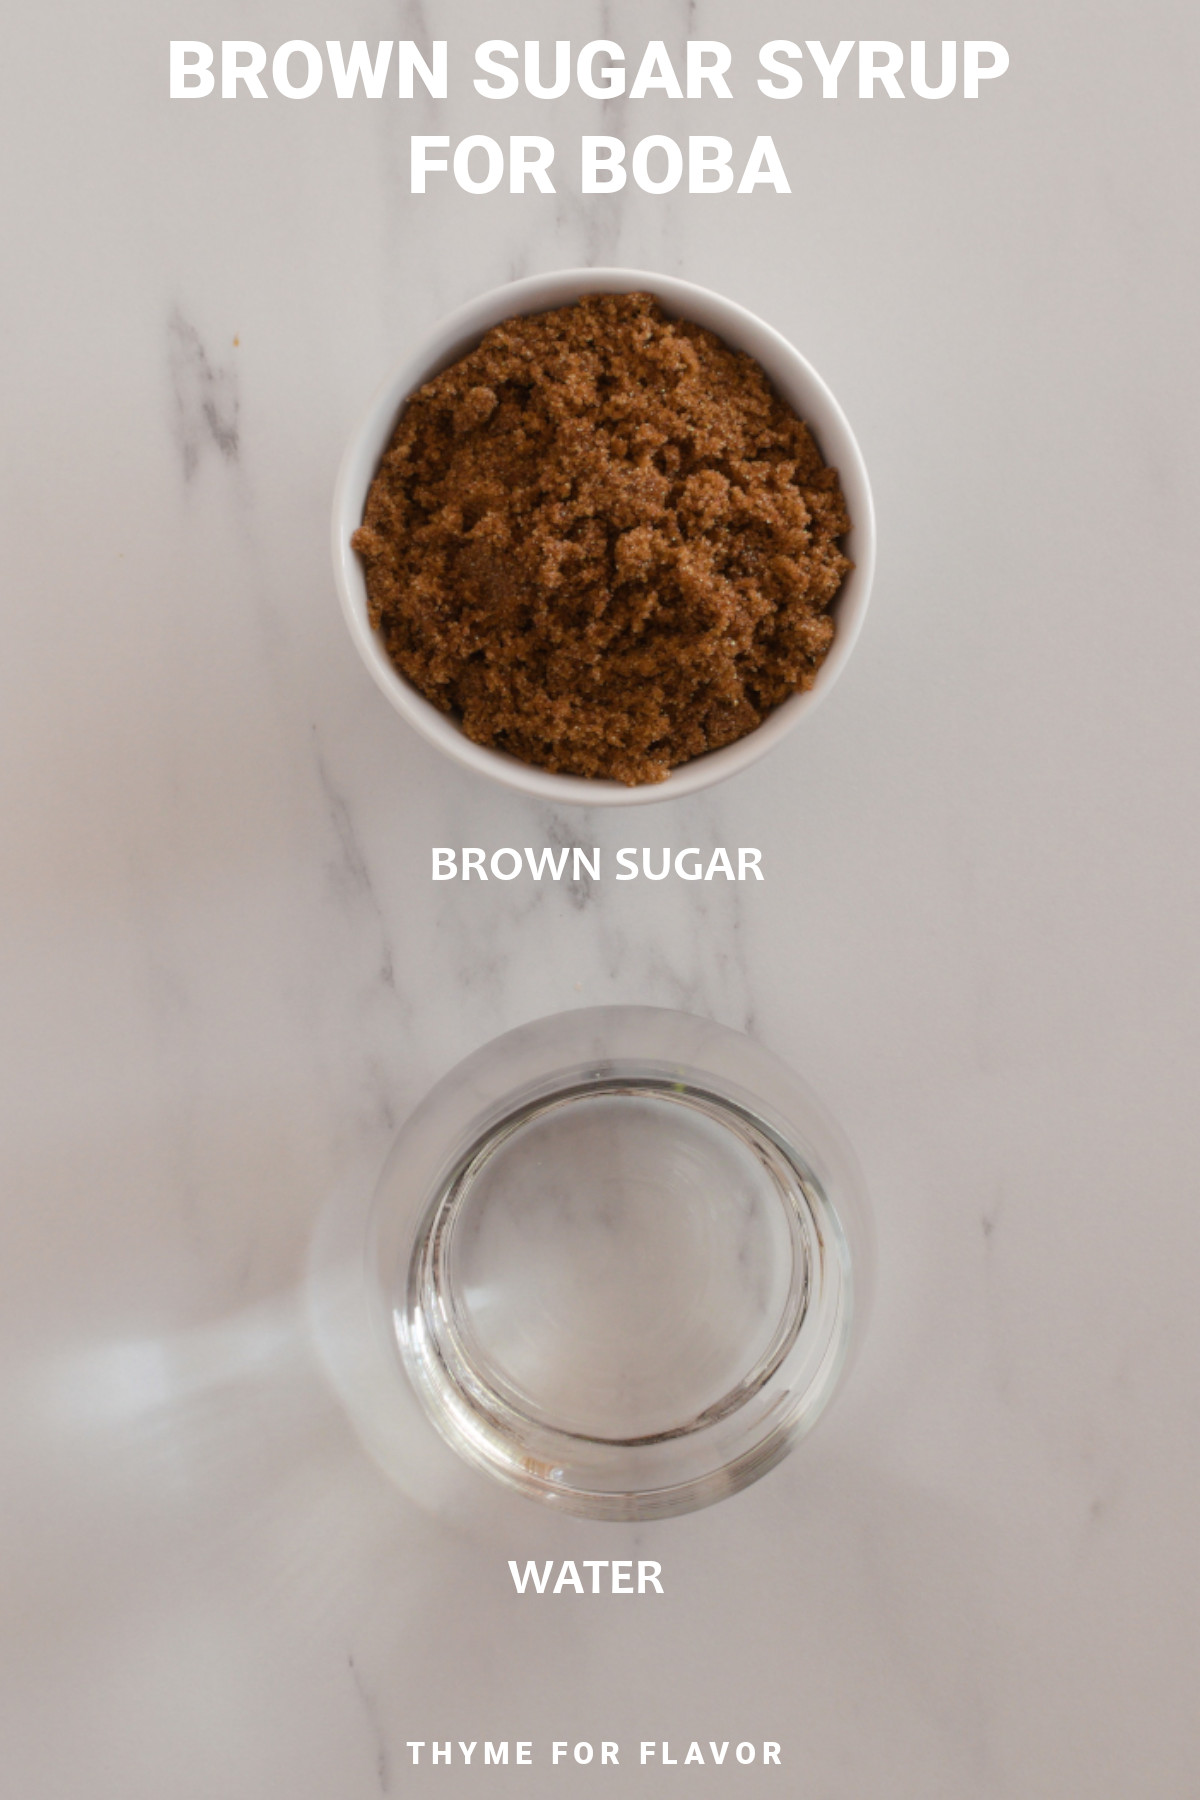 Ingredients for brown sugar syrup for boba.